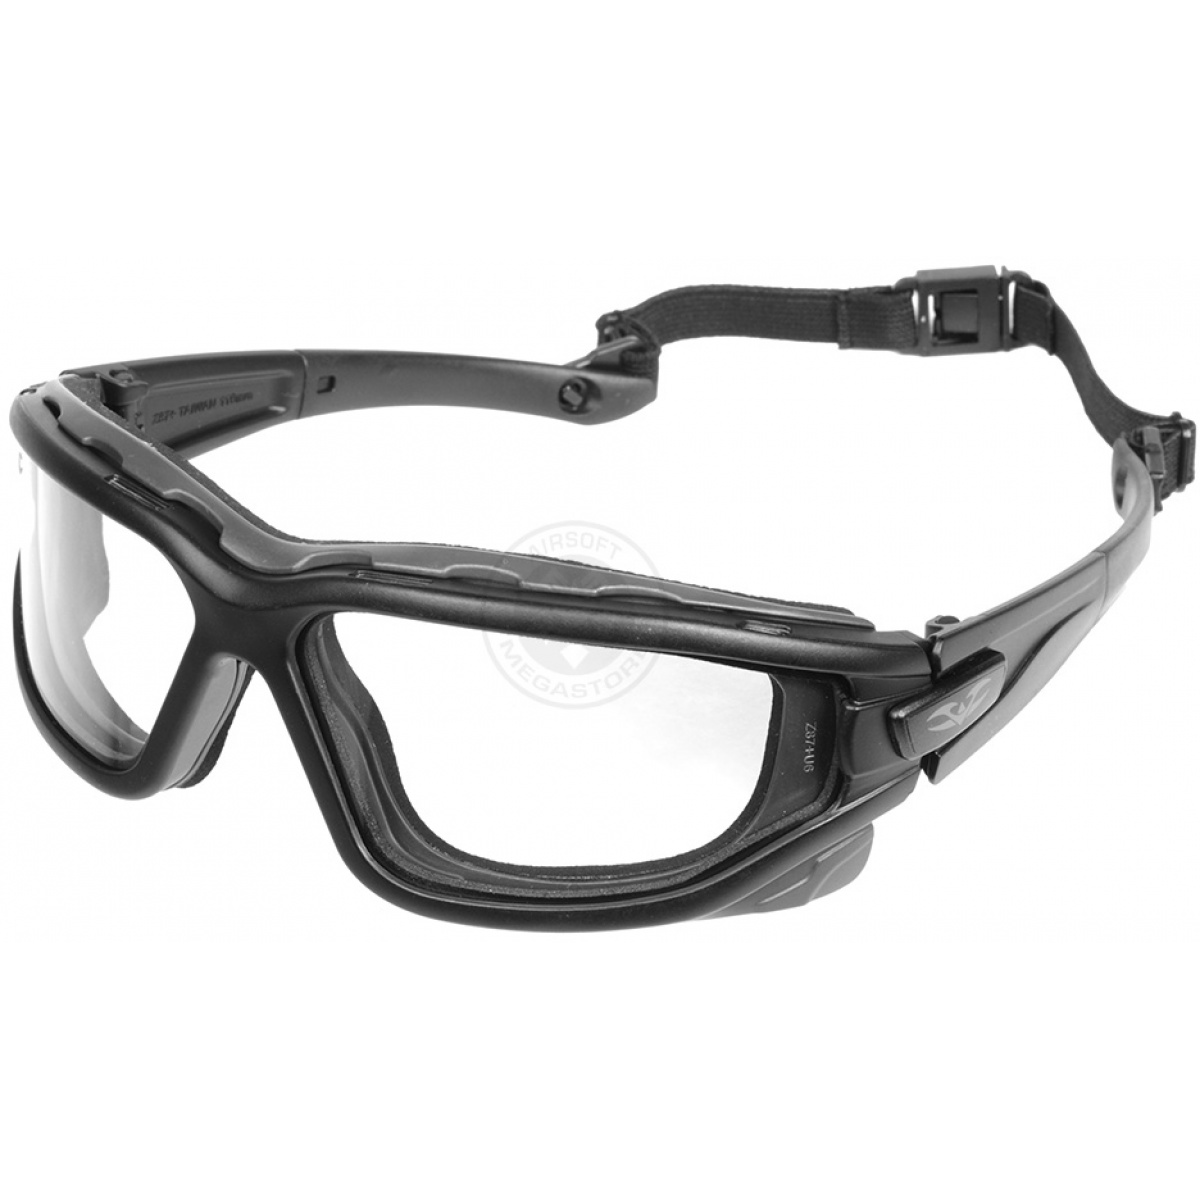 Valken Zulu Tactical Goggles Dual Pane Clear Lens Airsoft Free Shipping 844959047606 